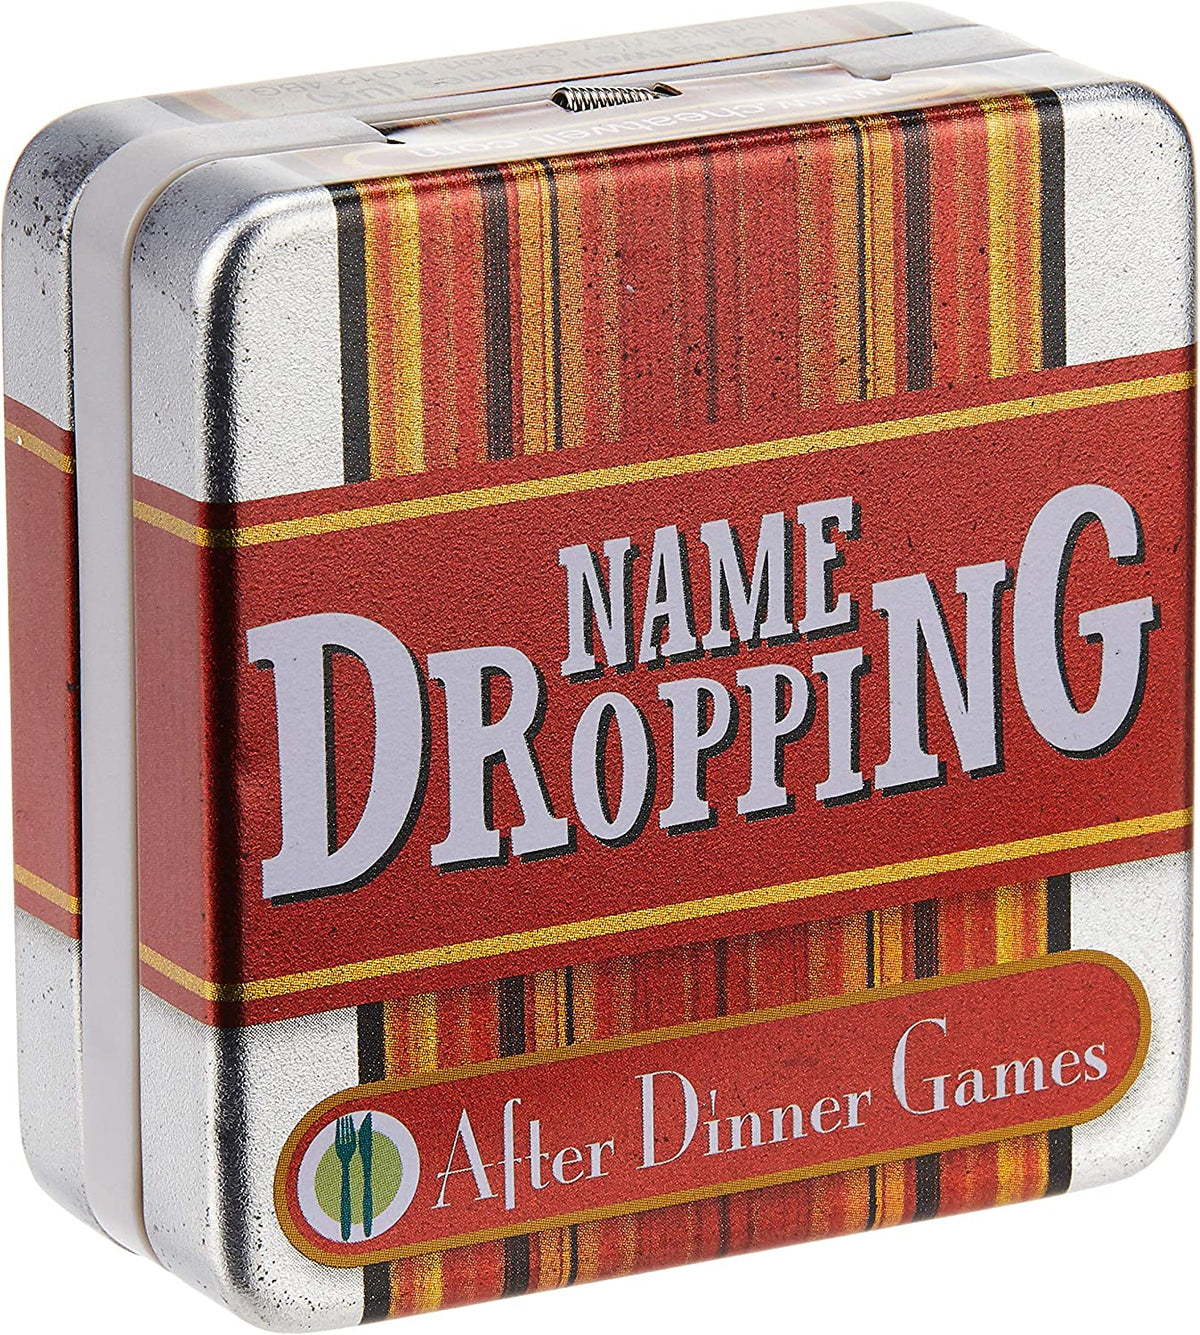 Name Dropping After Dinner Games